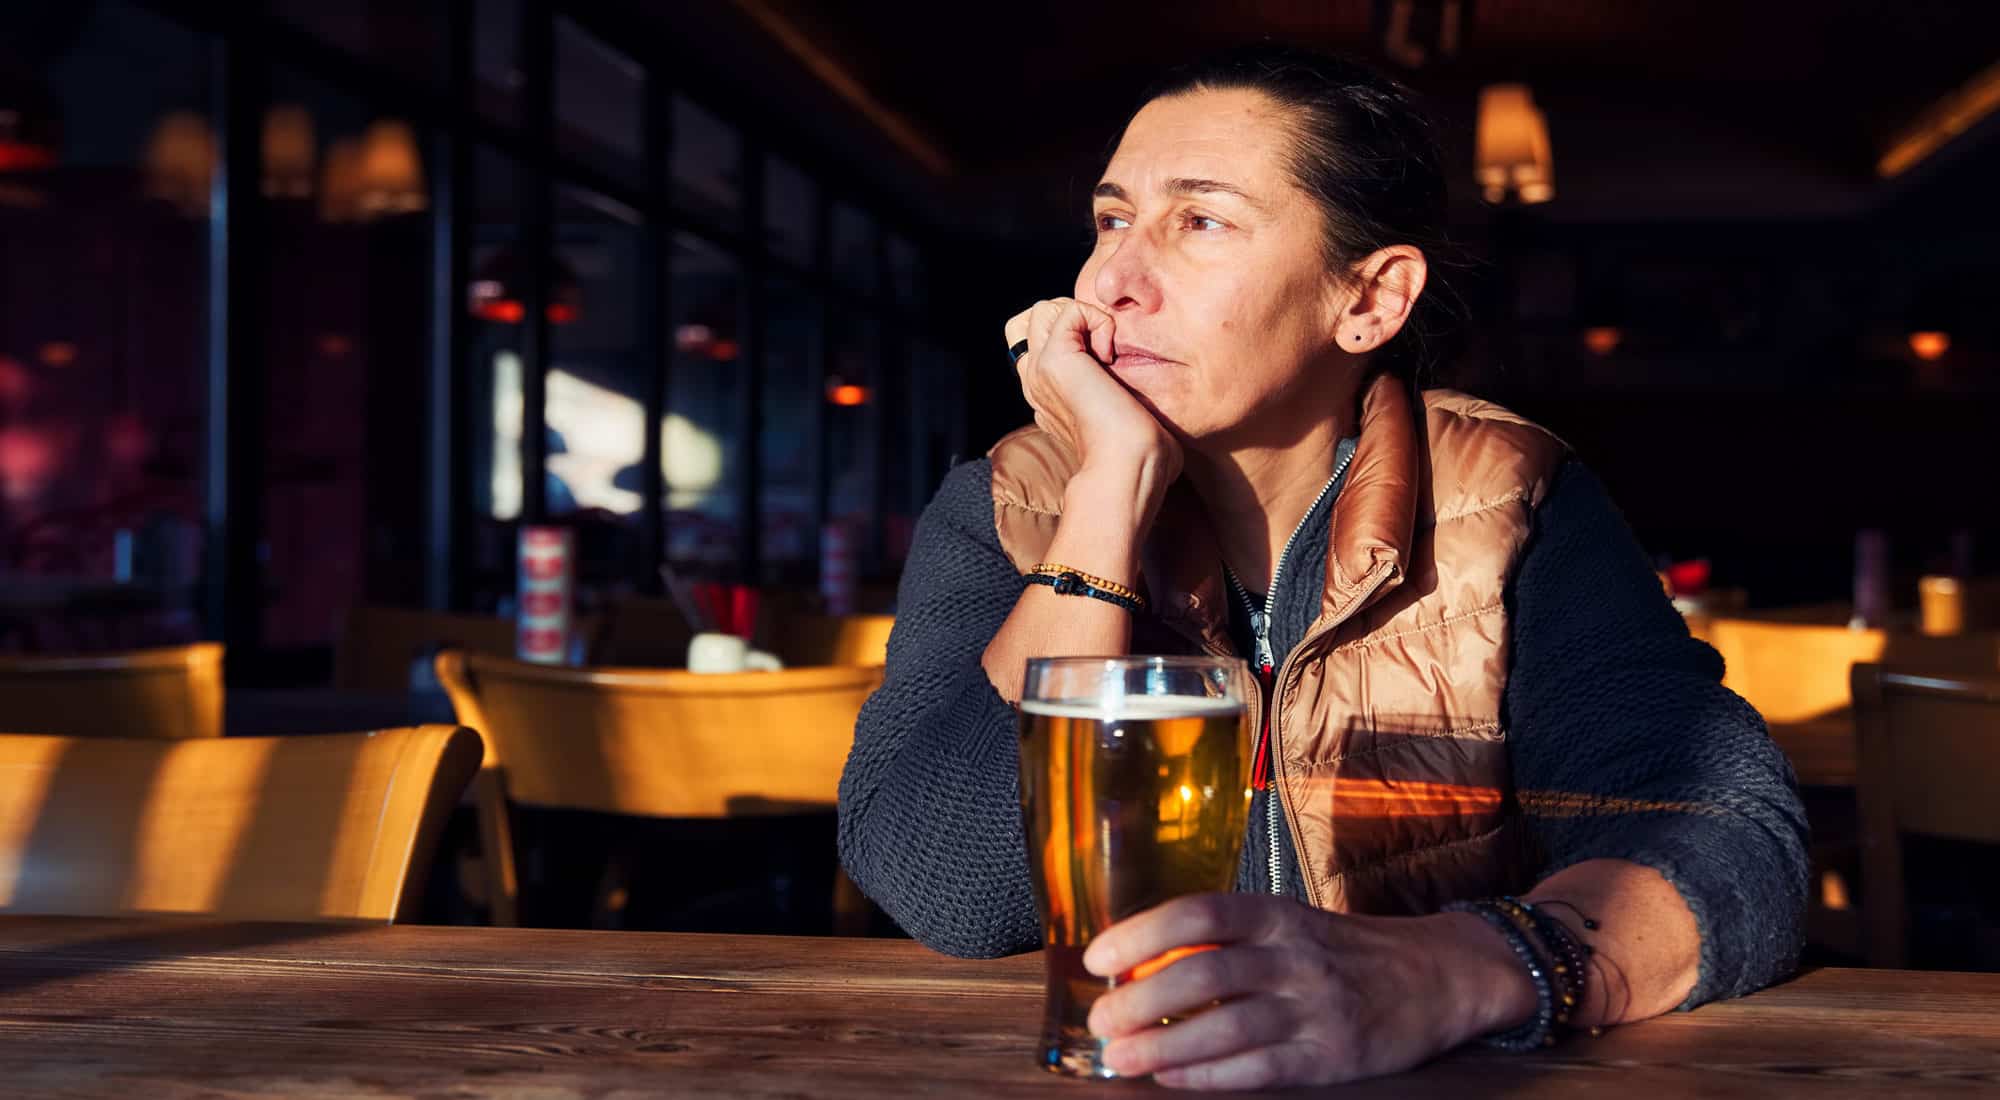 middle-aged woman drinking at bar